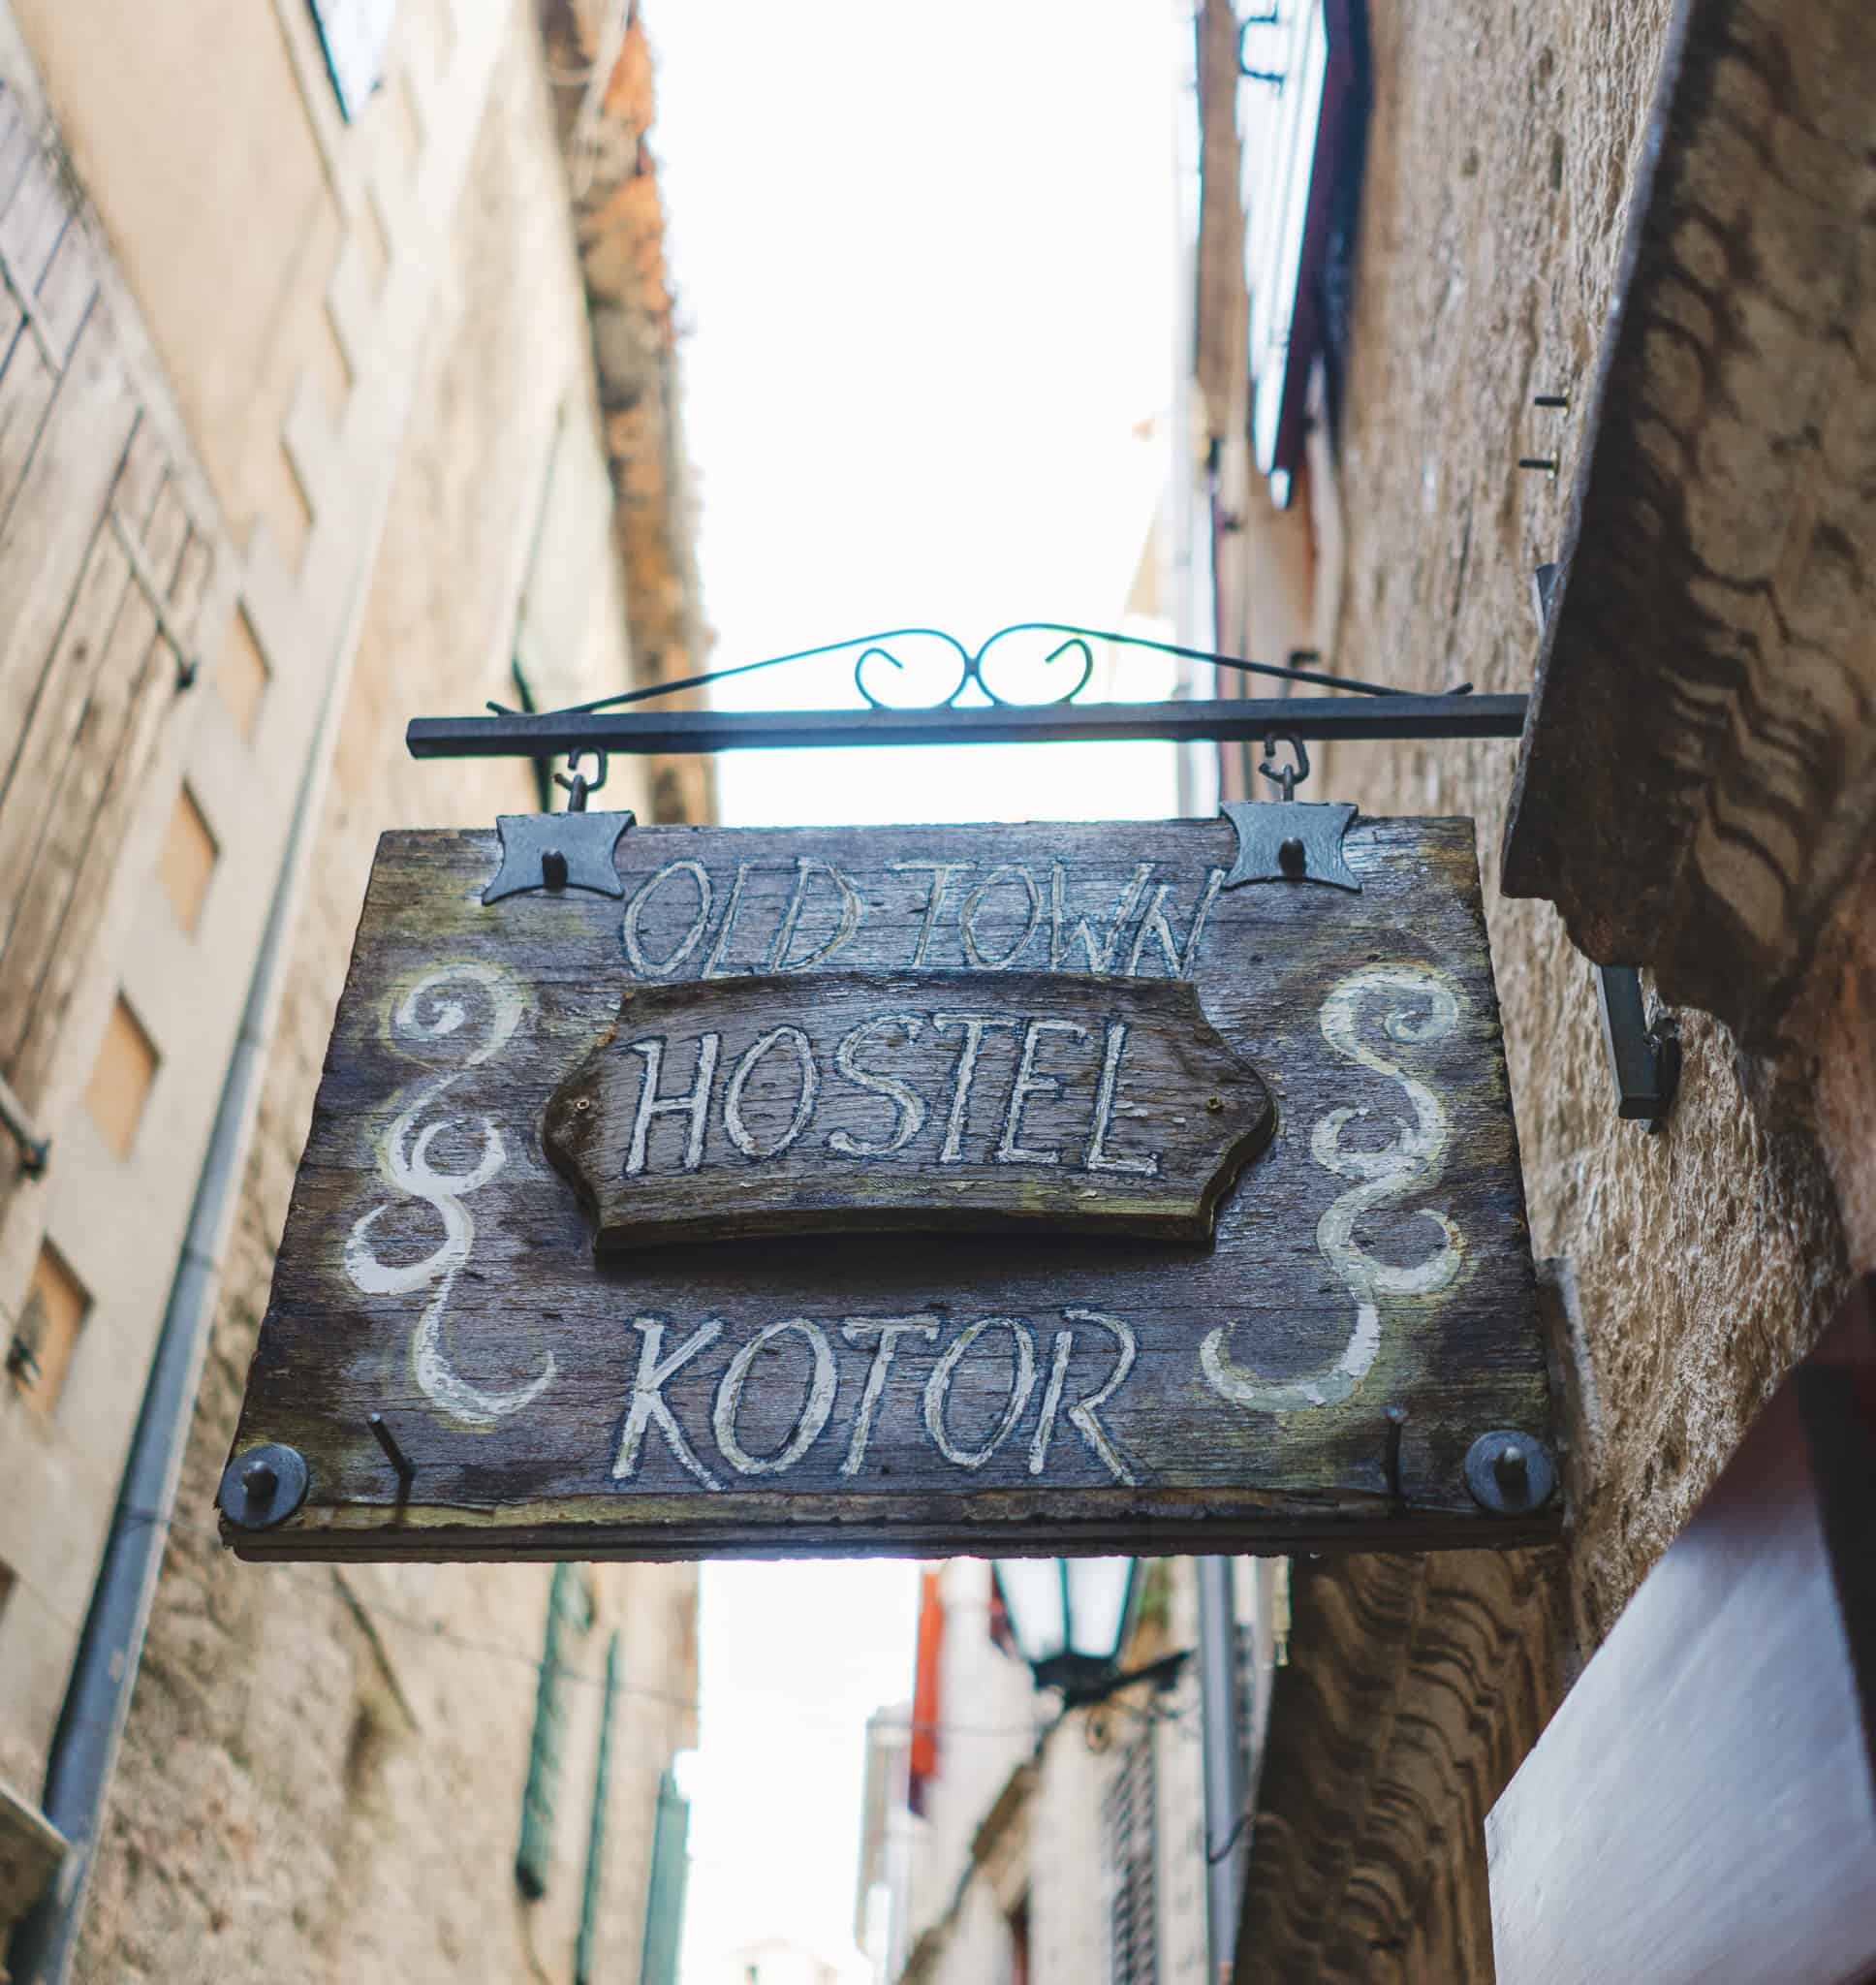 The sign outside the Old Town hostel in couture Montenegro